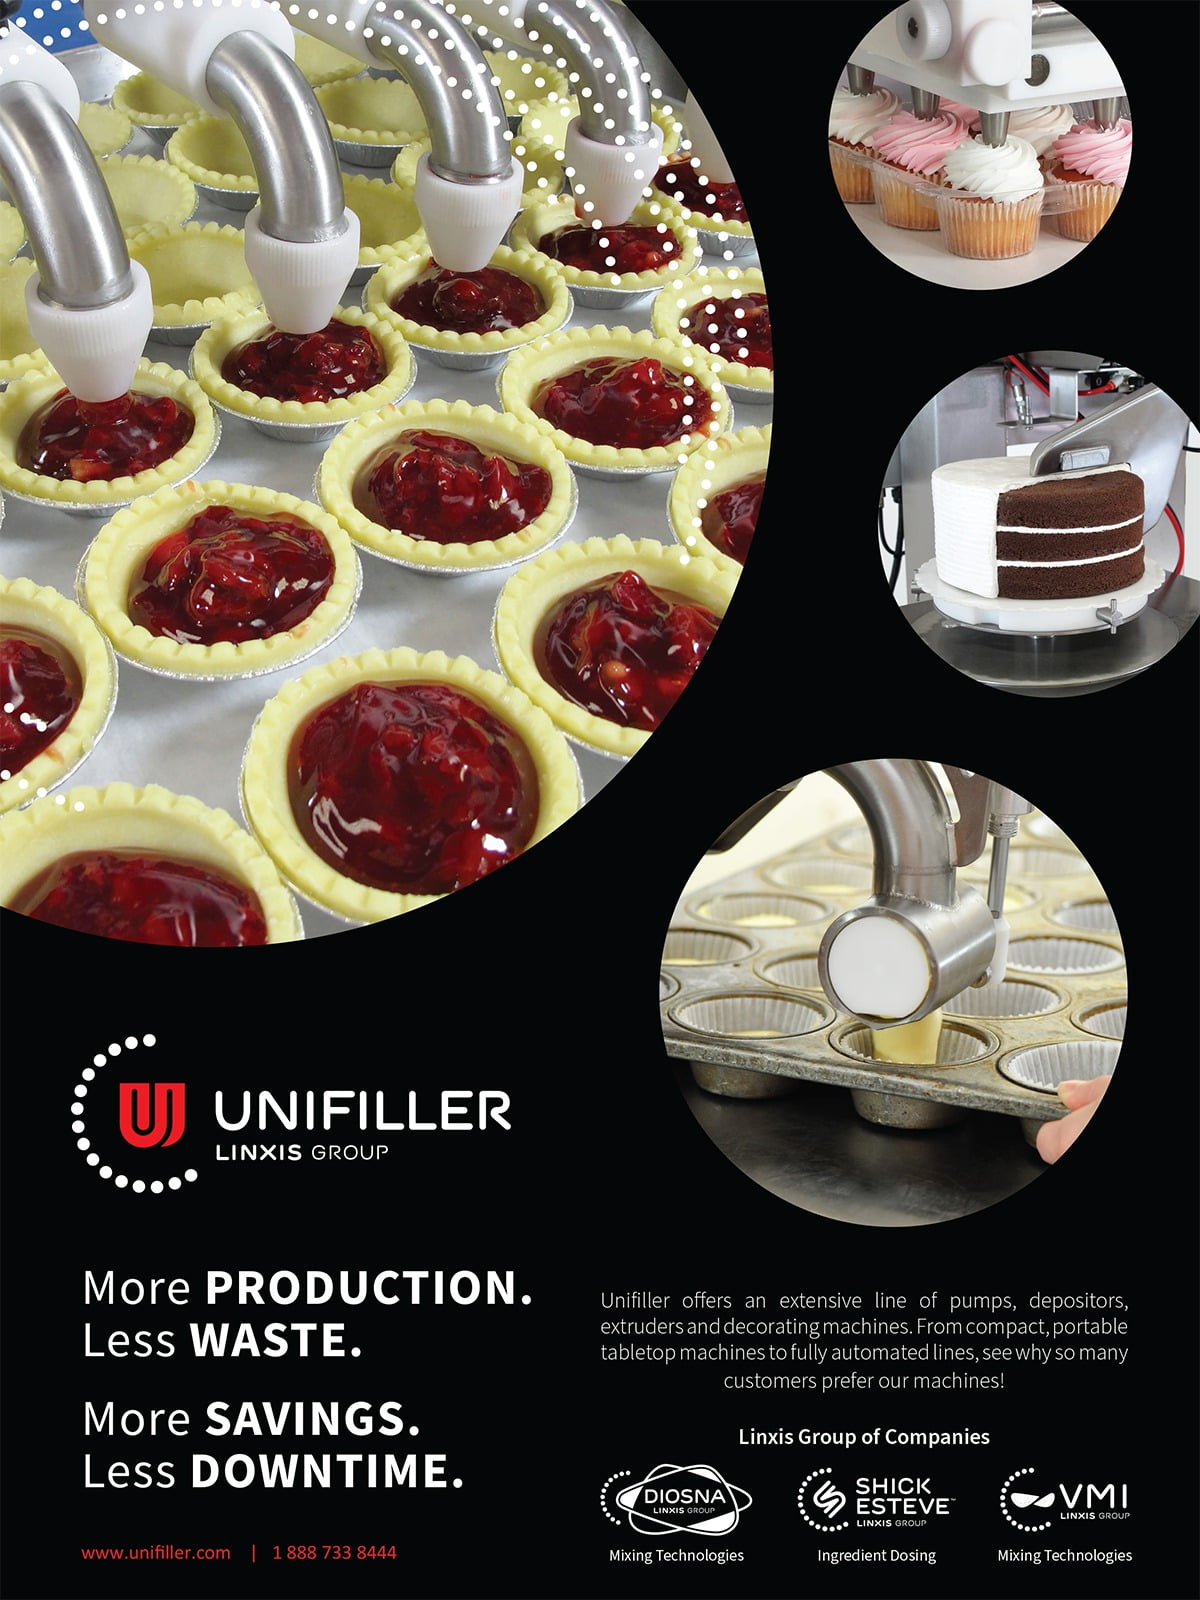 Full page ad, Circular photos, Black background, PIes, Cakes, Equipment